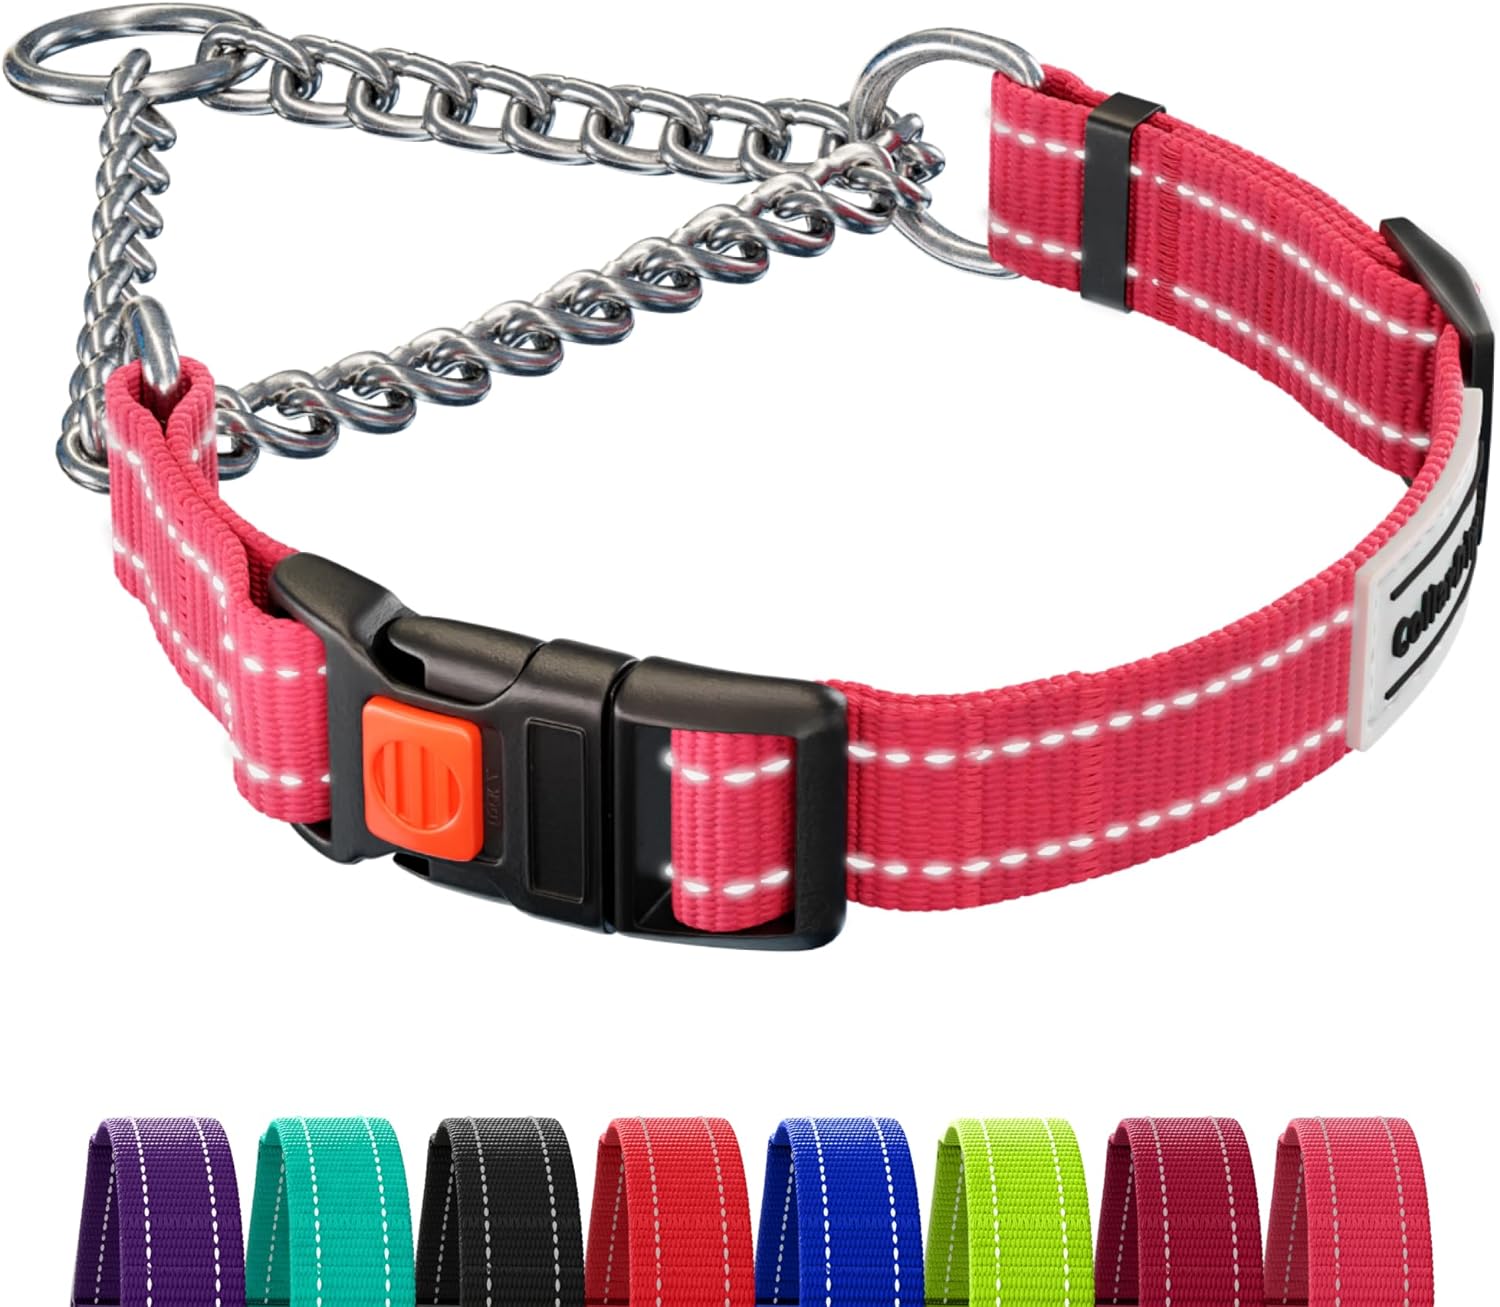 CollarDirect Martingale Dog Collar with Stainless Steel Chain and Quick Release Buckle - Reflective Collar for Large, Medium, Small Dogs - Pink, Medium (Neck Size 14-17)